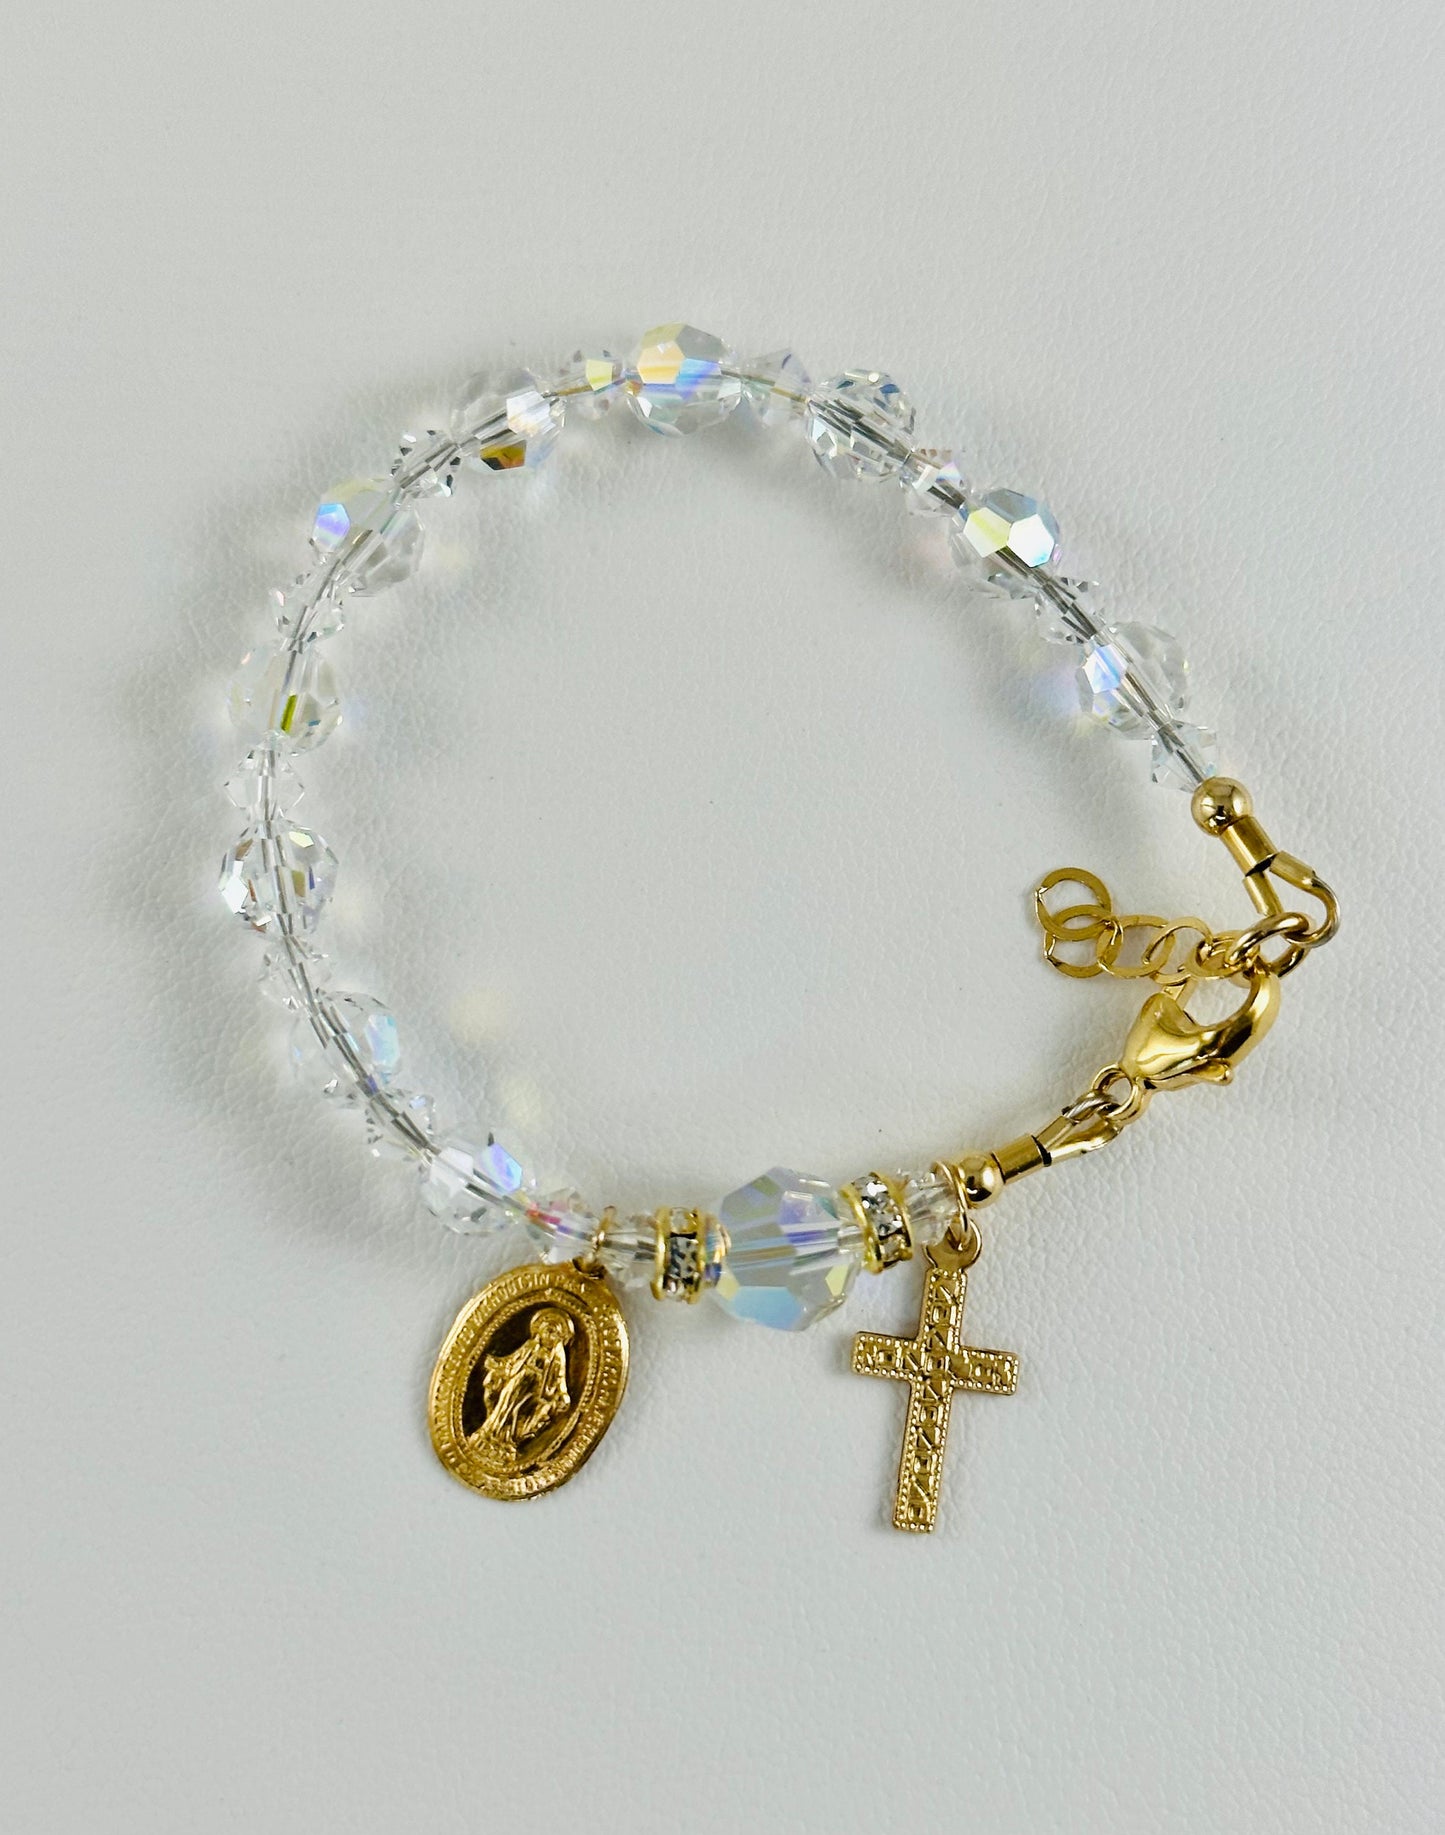 Gold Crystal One Decade Rosary Bracelet,Crystal Rosary Bracelet,First Holy Communion Confirmation Rosary Bracelet,Baptism Rosary Bracelet